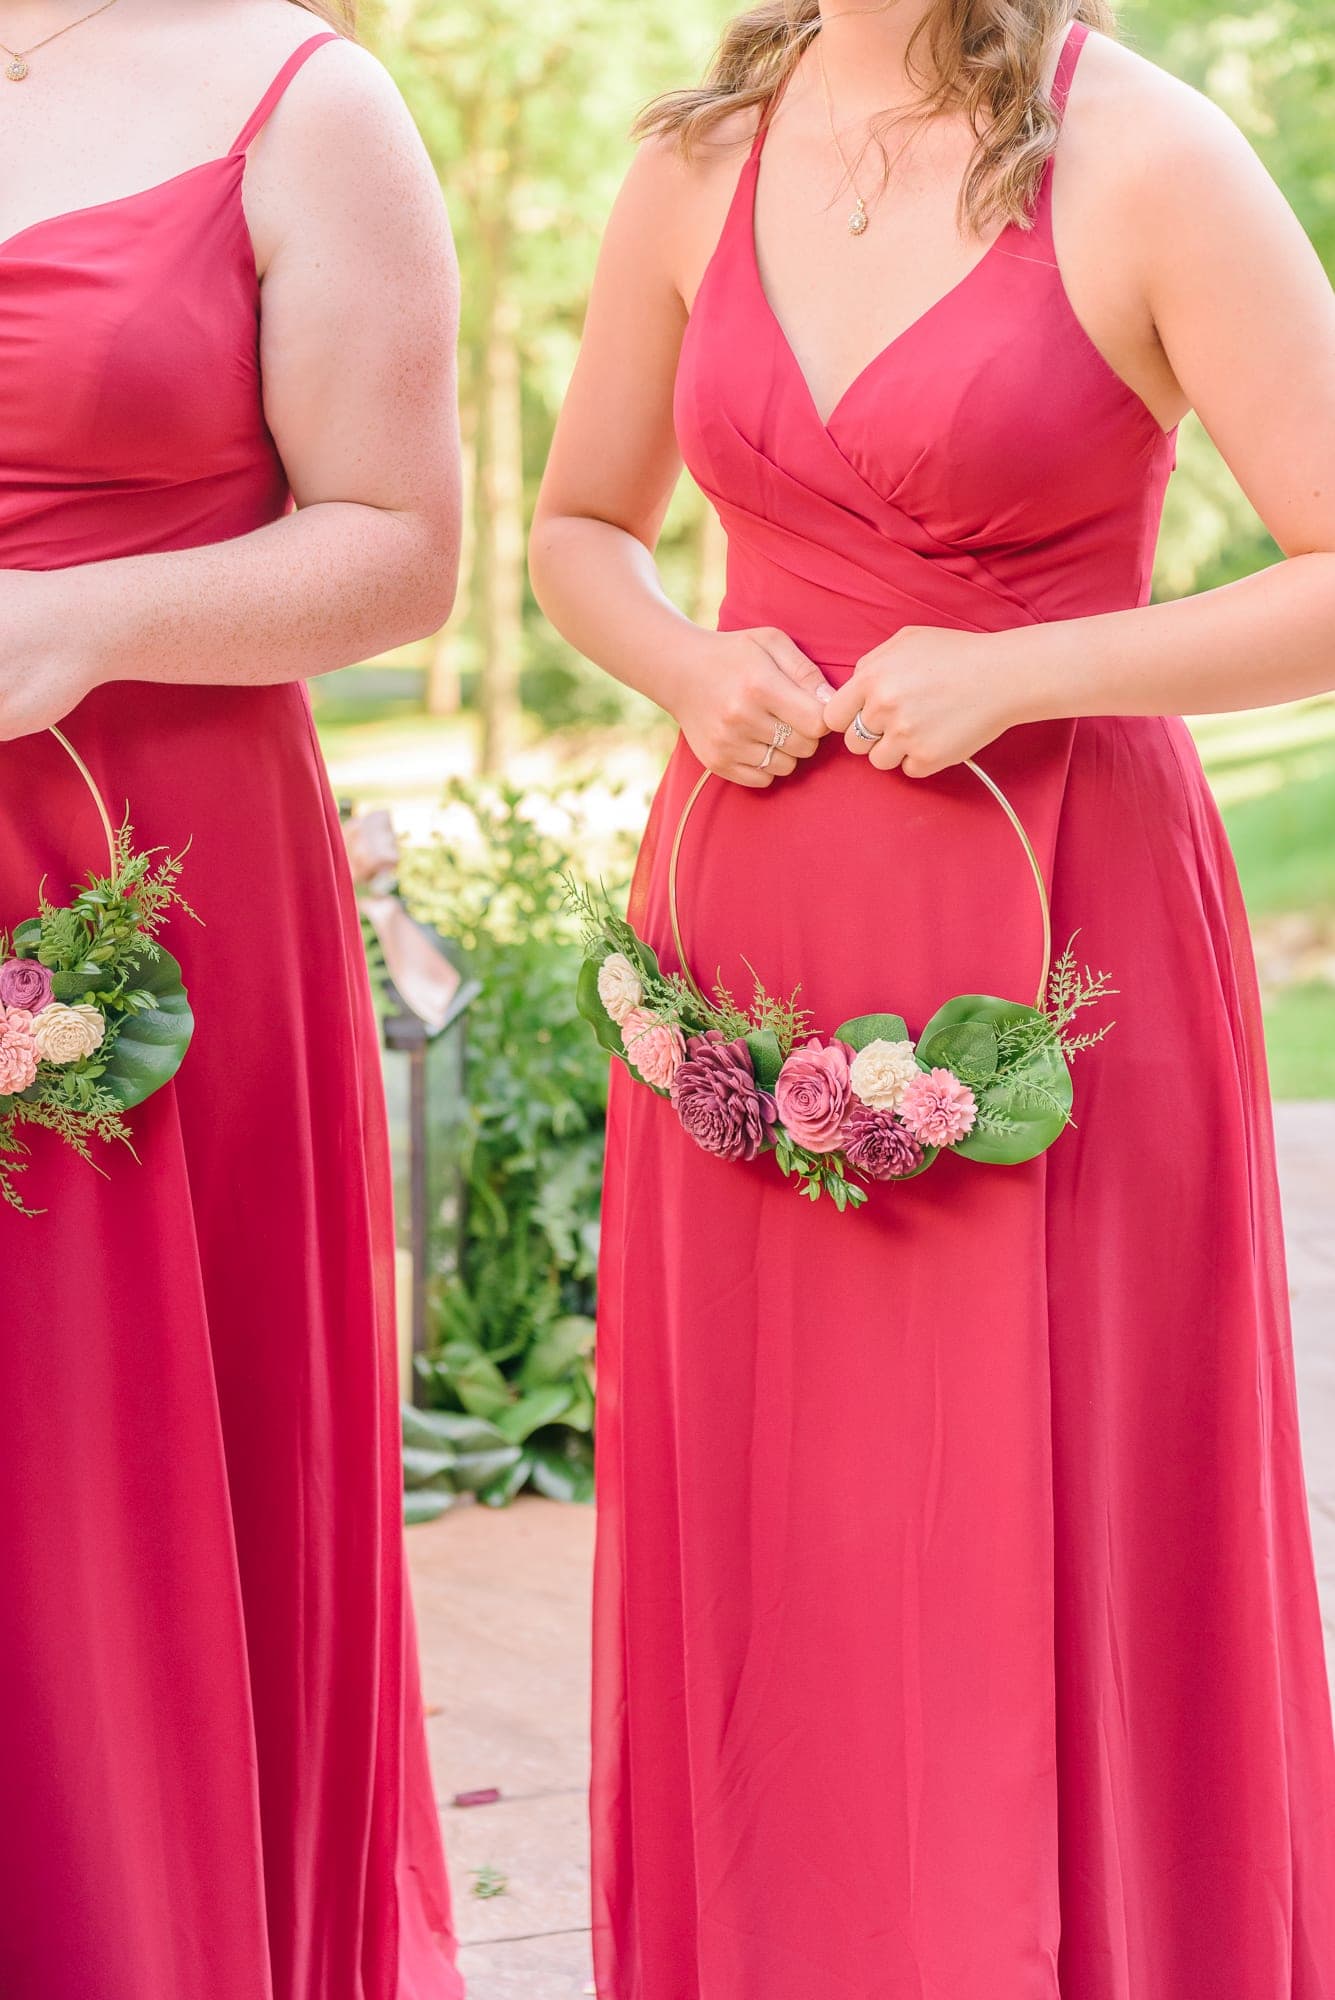 Bridesmaids held floral hoops instead of bouquets at this unique Delaney Ridge wedding.